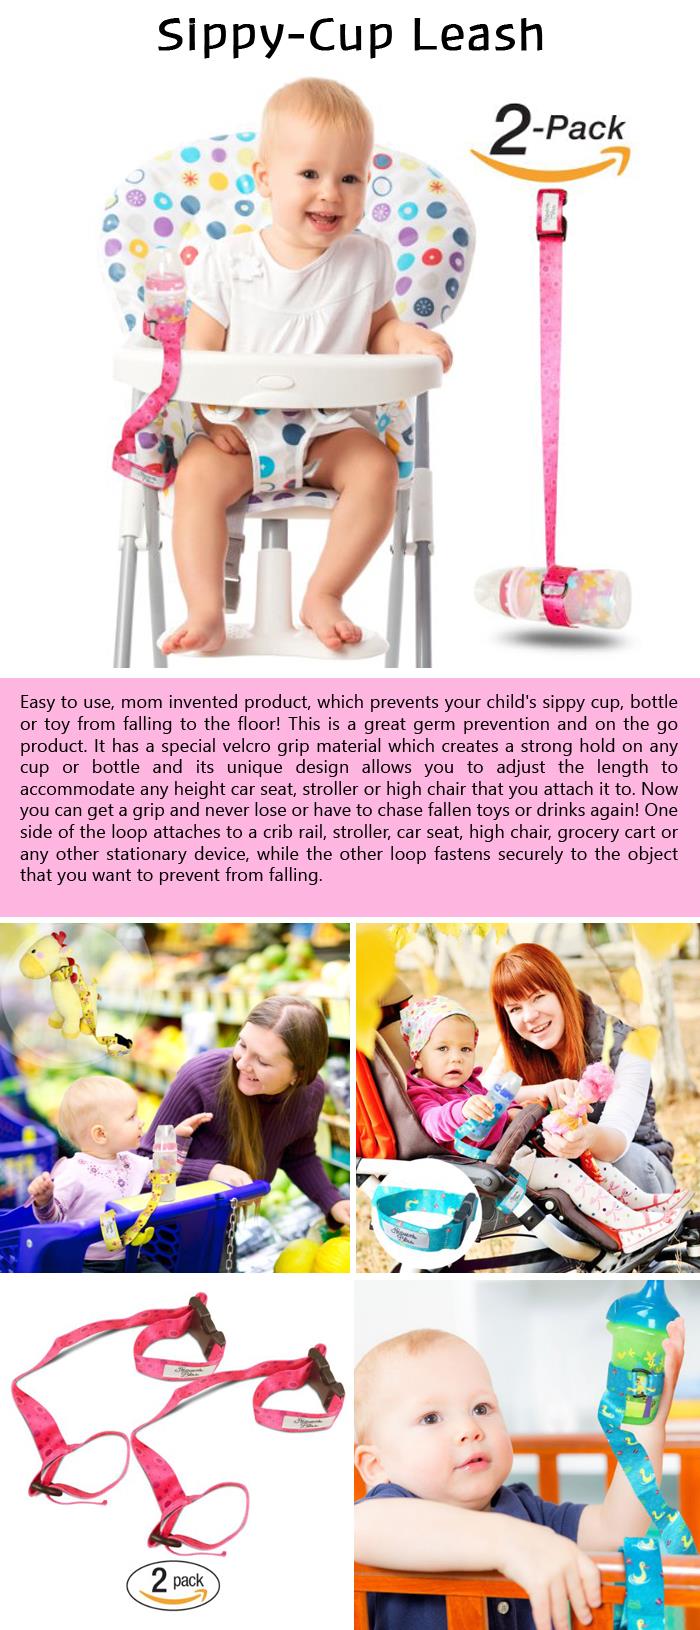 Sippy-Cup Leash